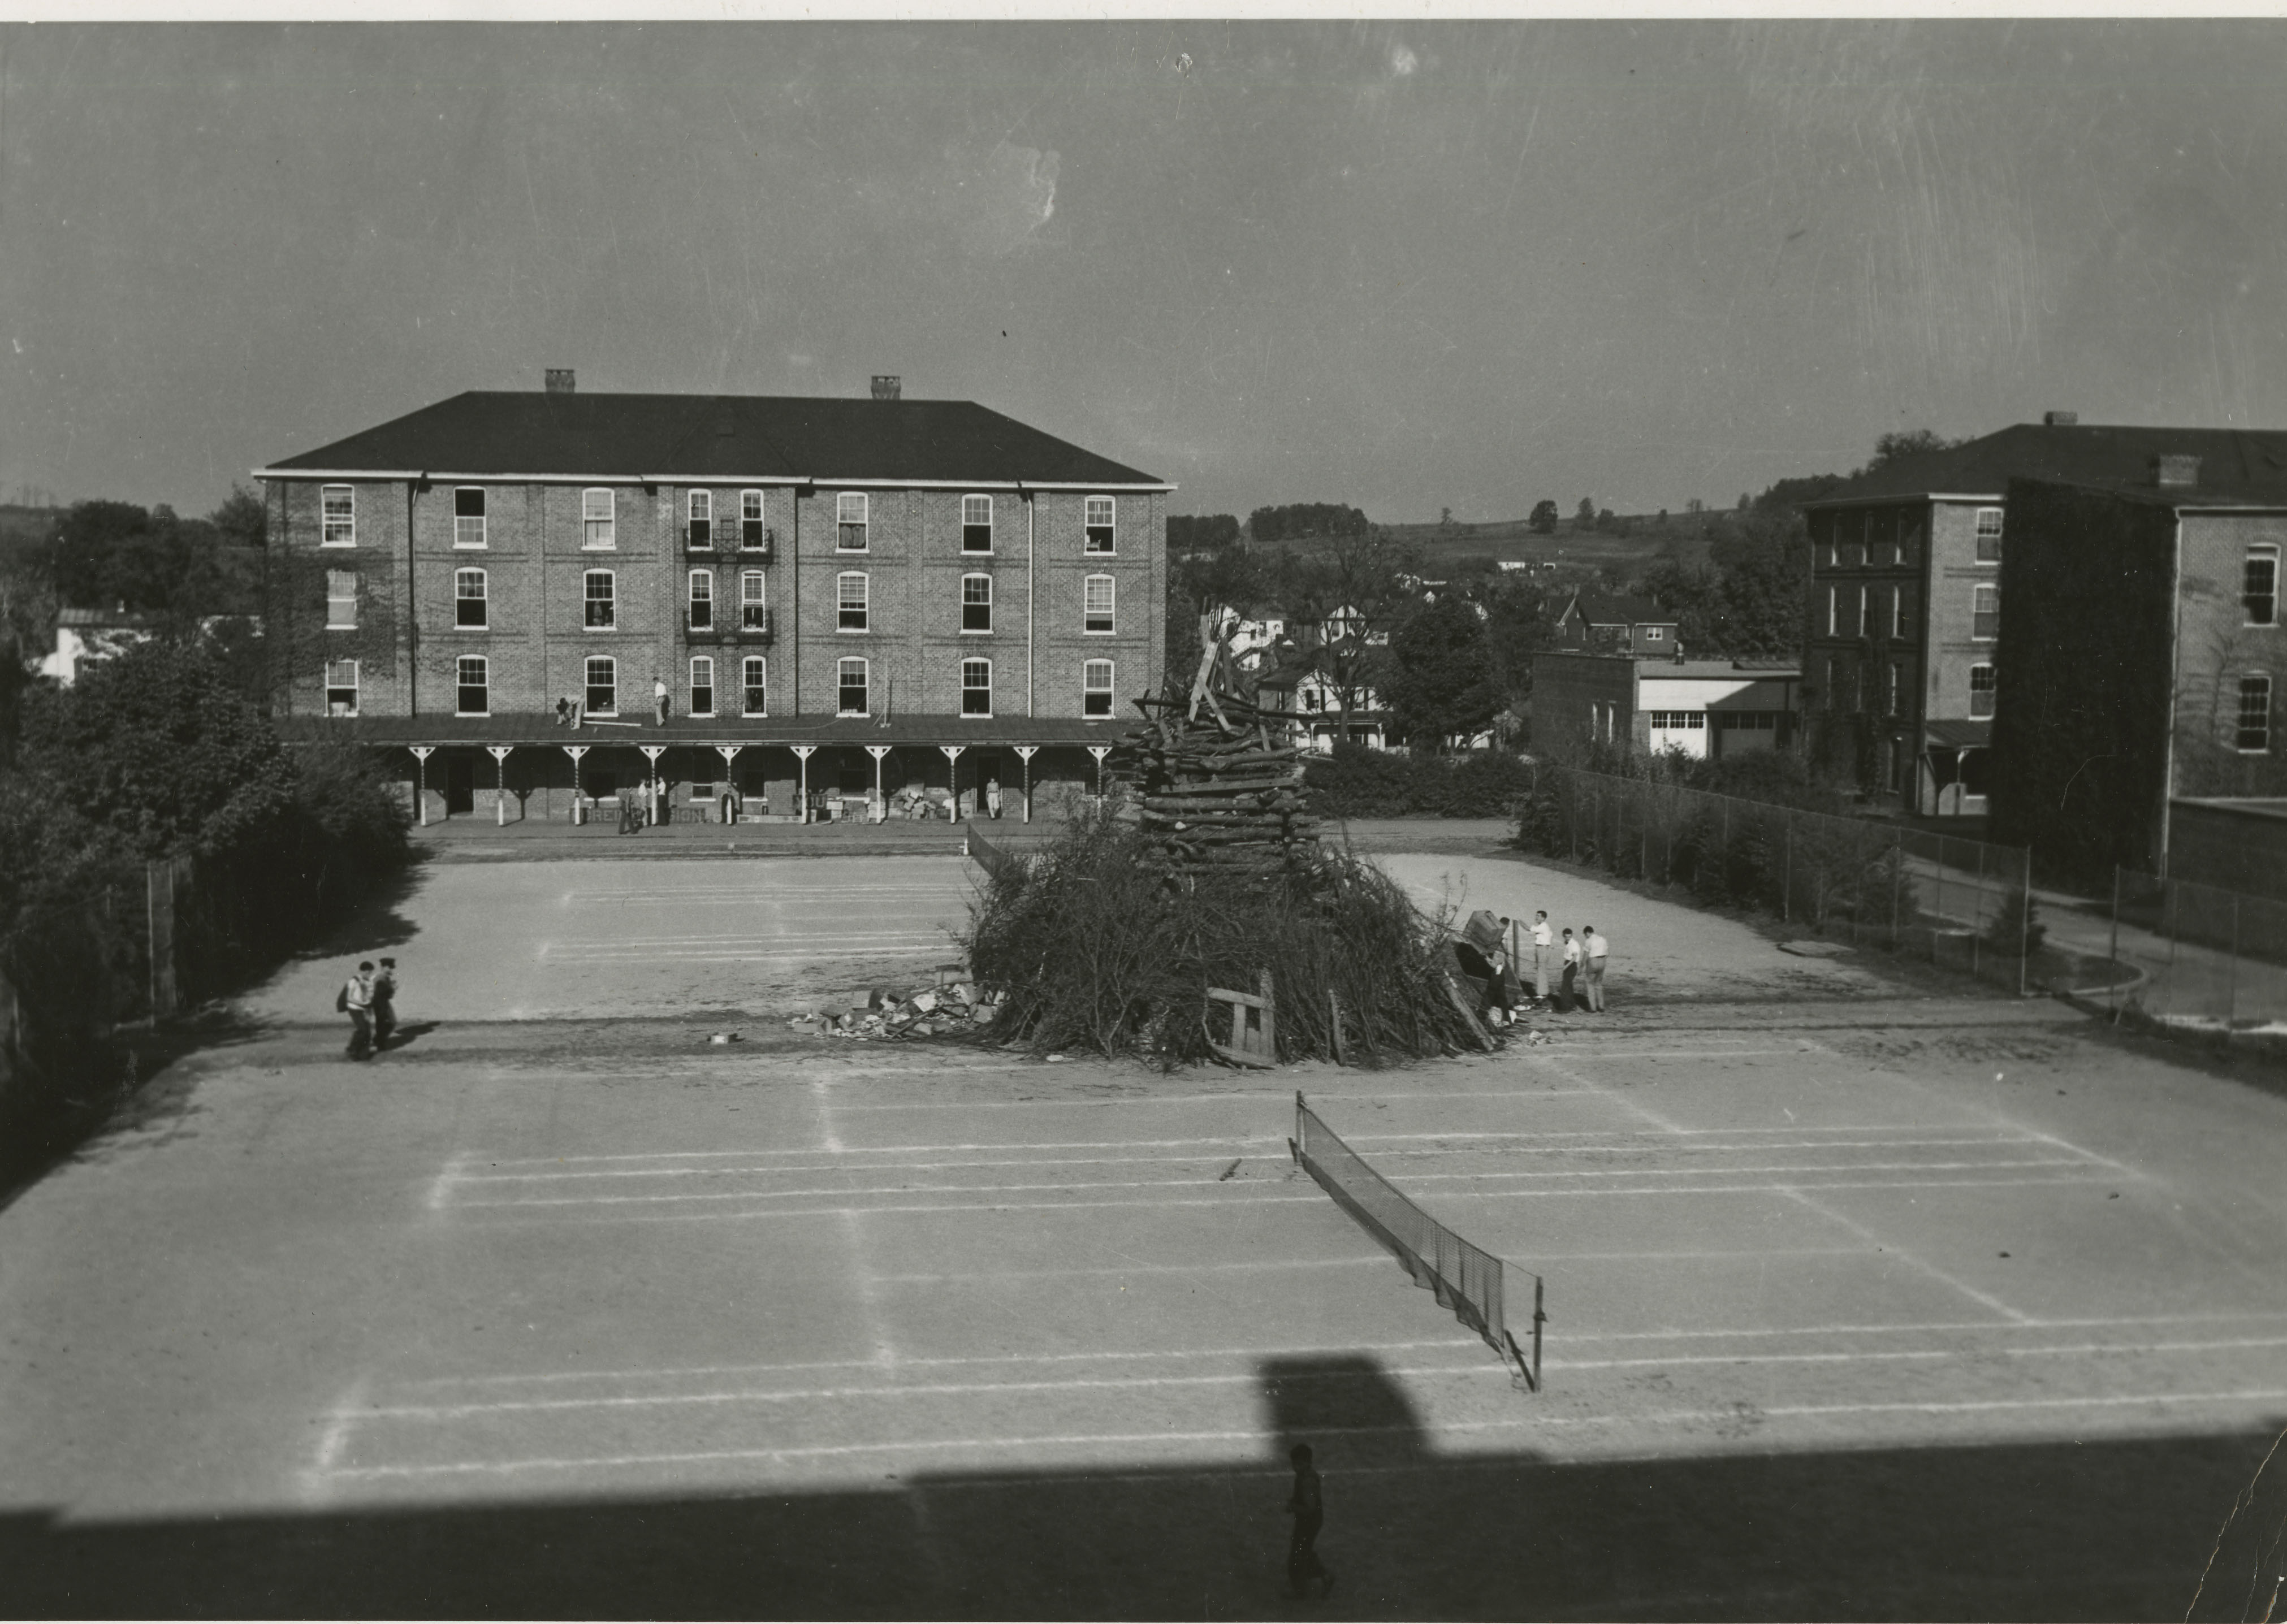 Bonfire being built in the Upper Quad, 1940